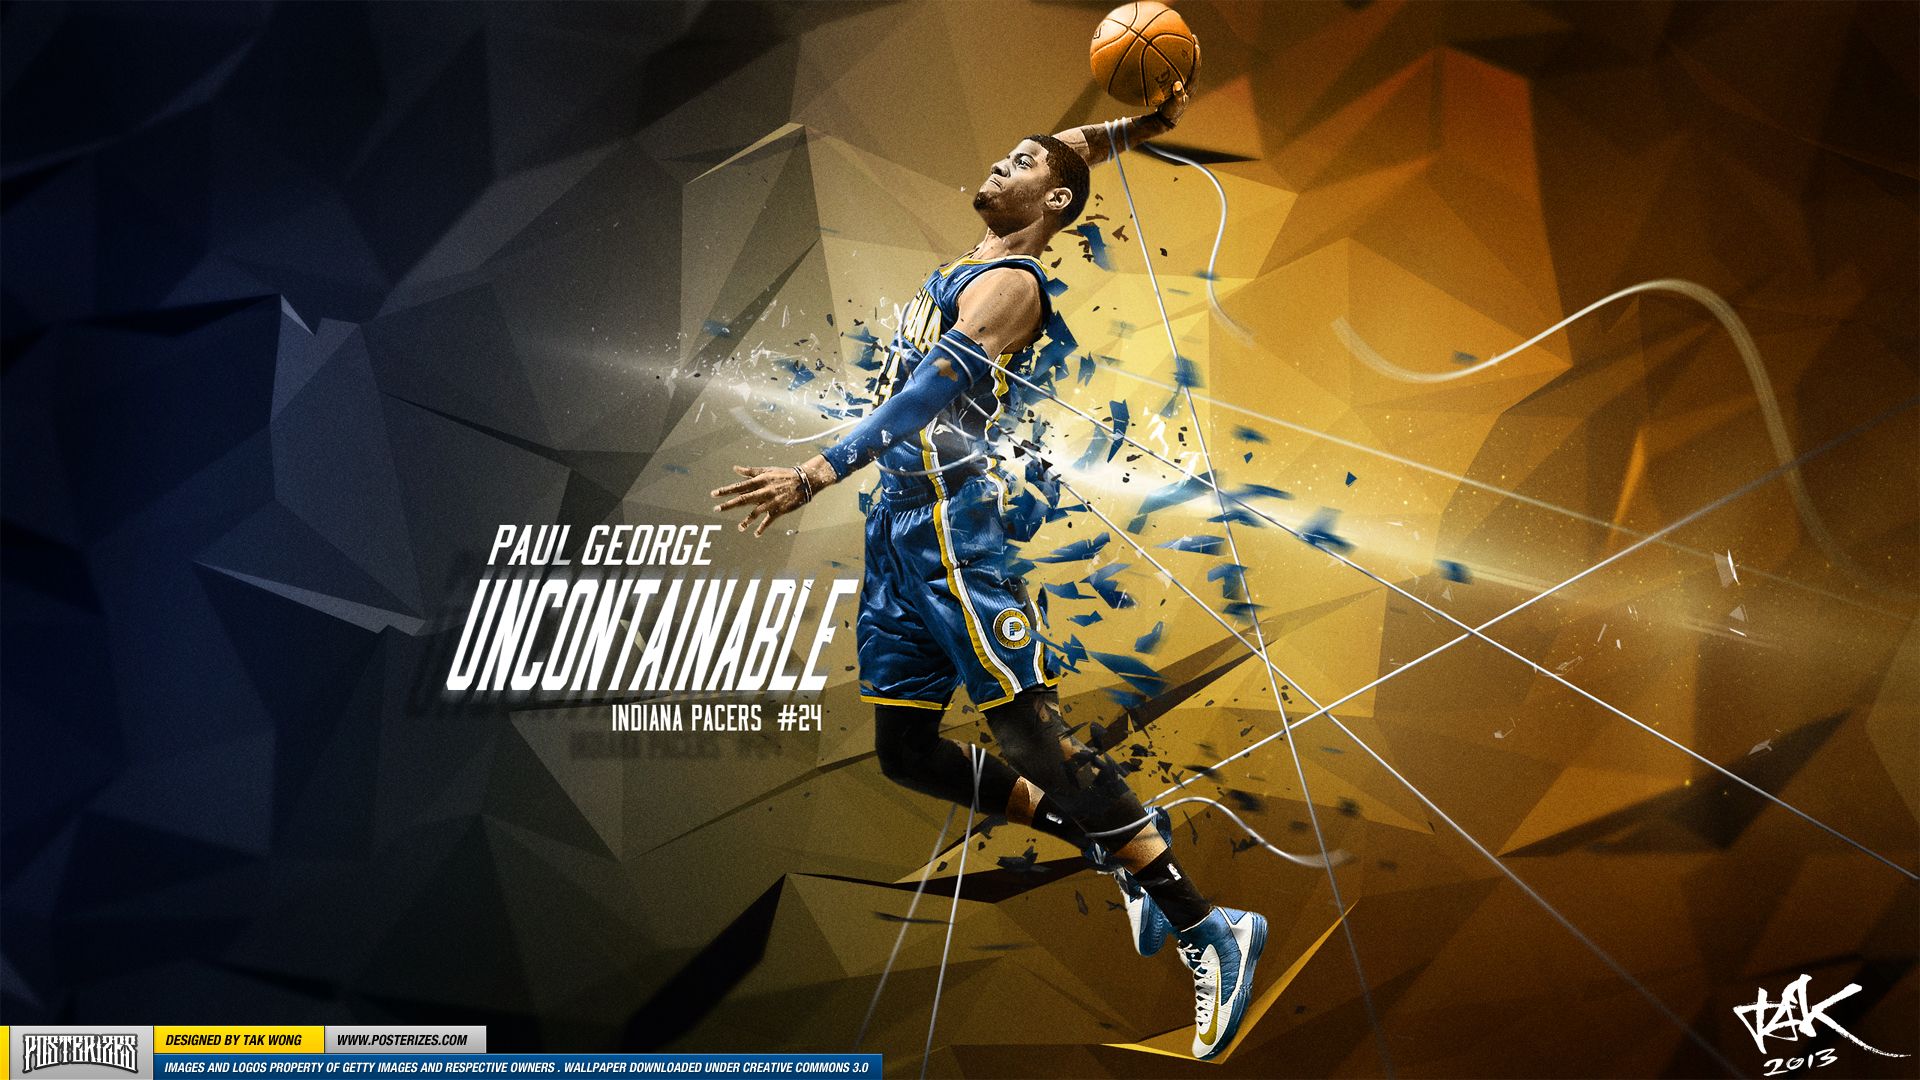 Paul George Uncontainable Wallpaper Posterizes Nba